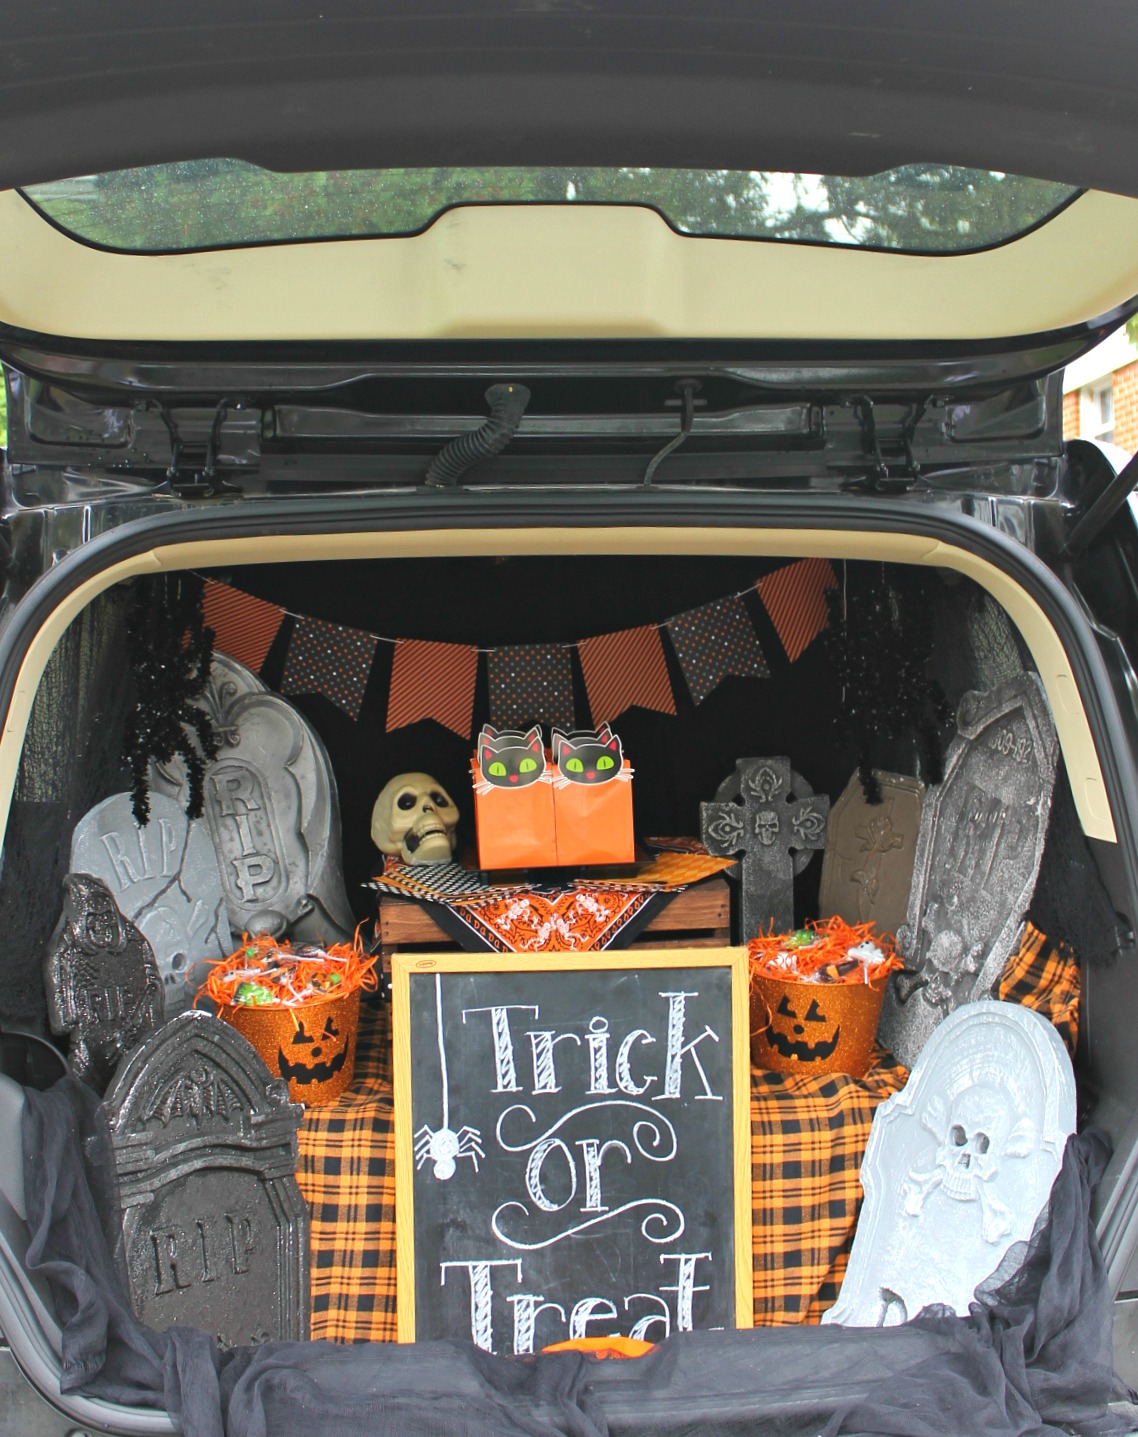 Cupcake Wishes & Birthday Dreams: Trunk or Treat Blog Hop